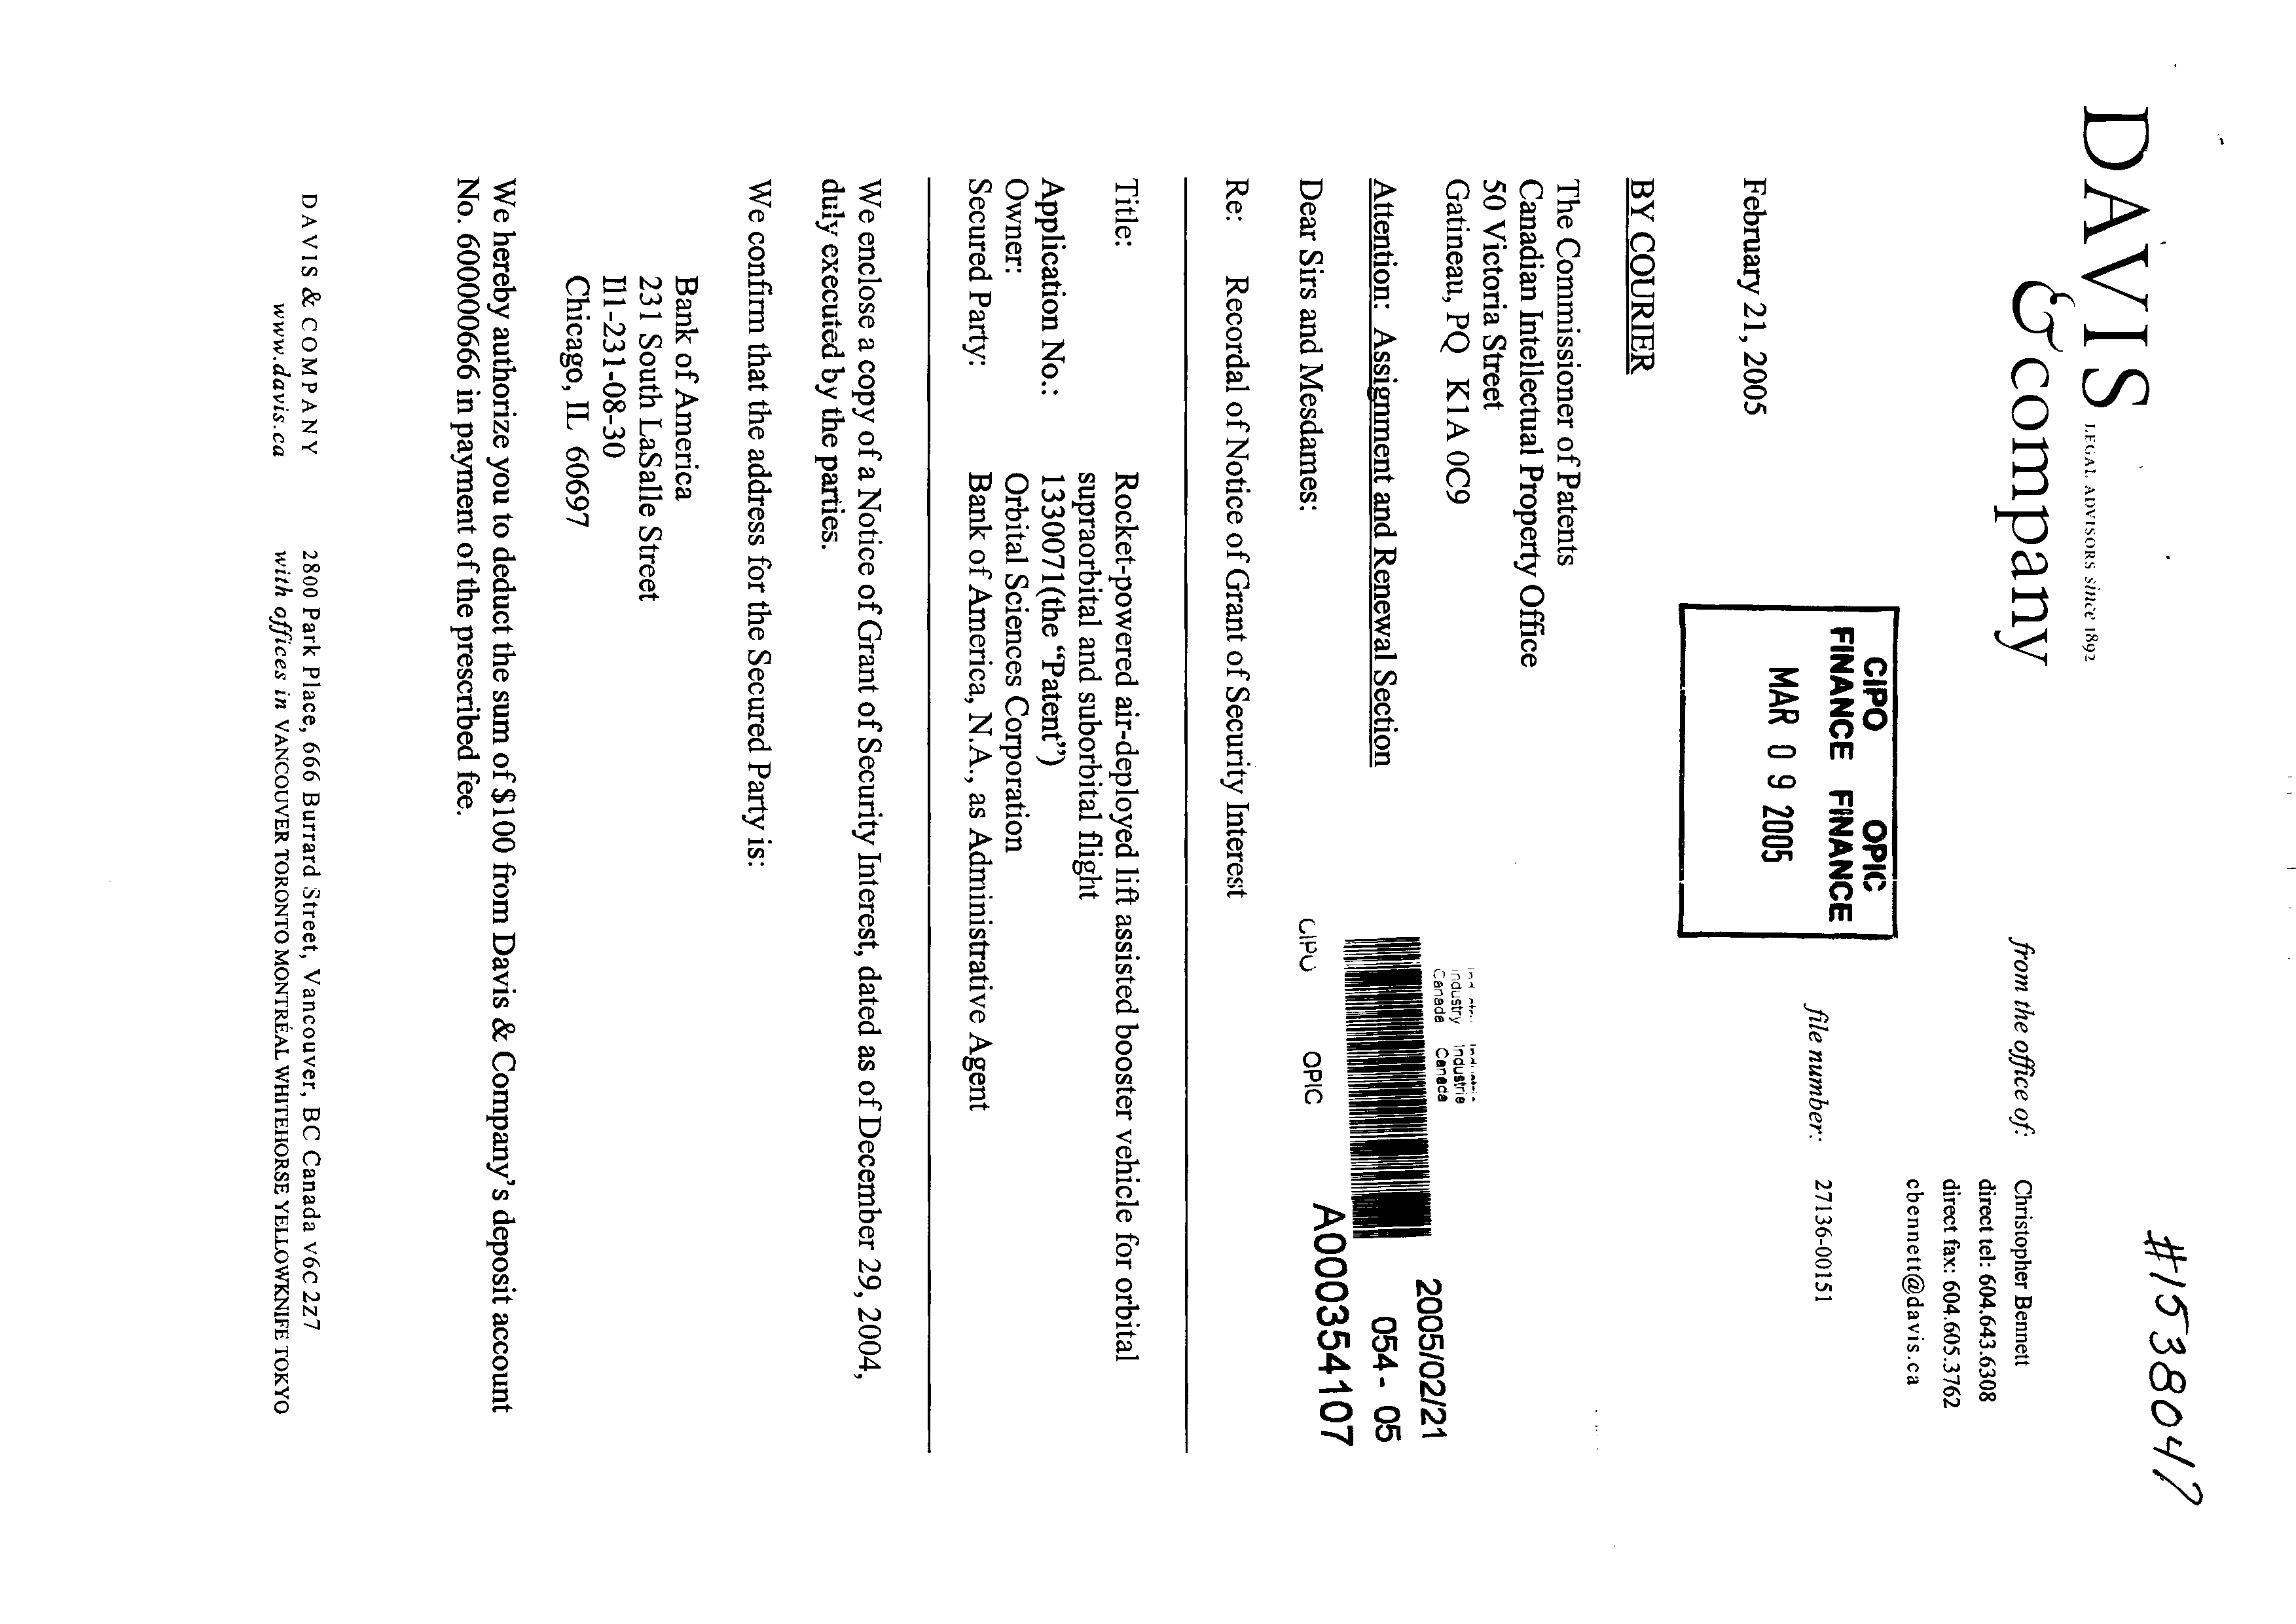 Canadian Patent Document 1330071. Assignment 20050221. Image 1 of 5